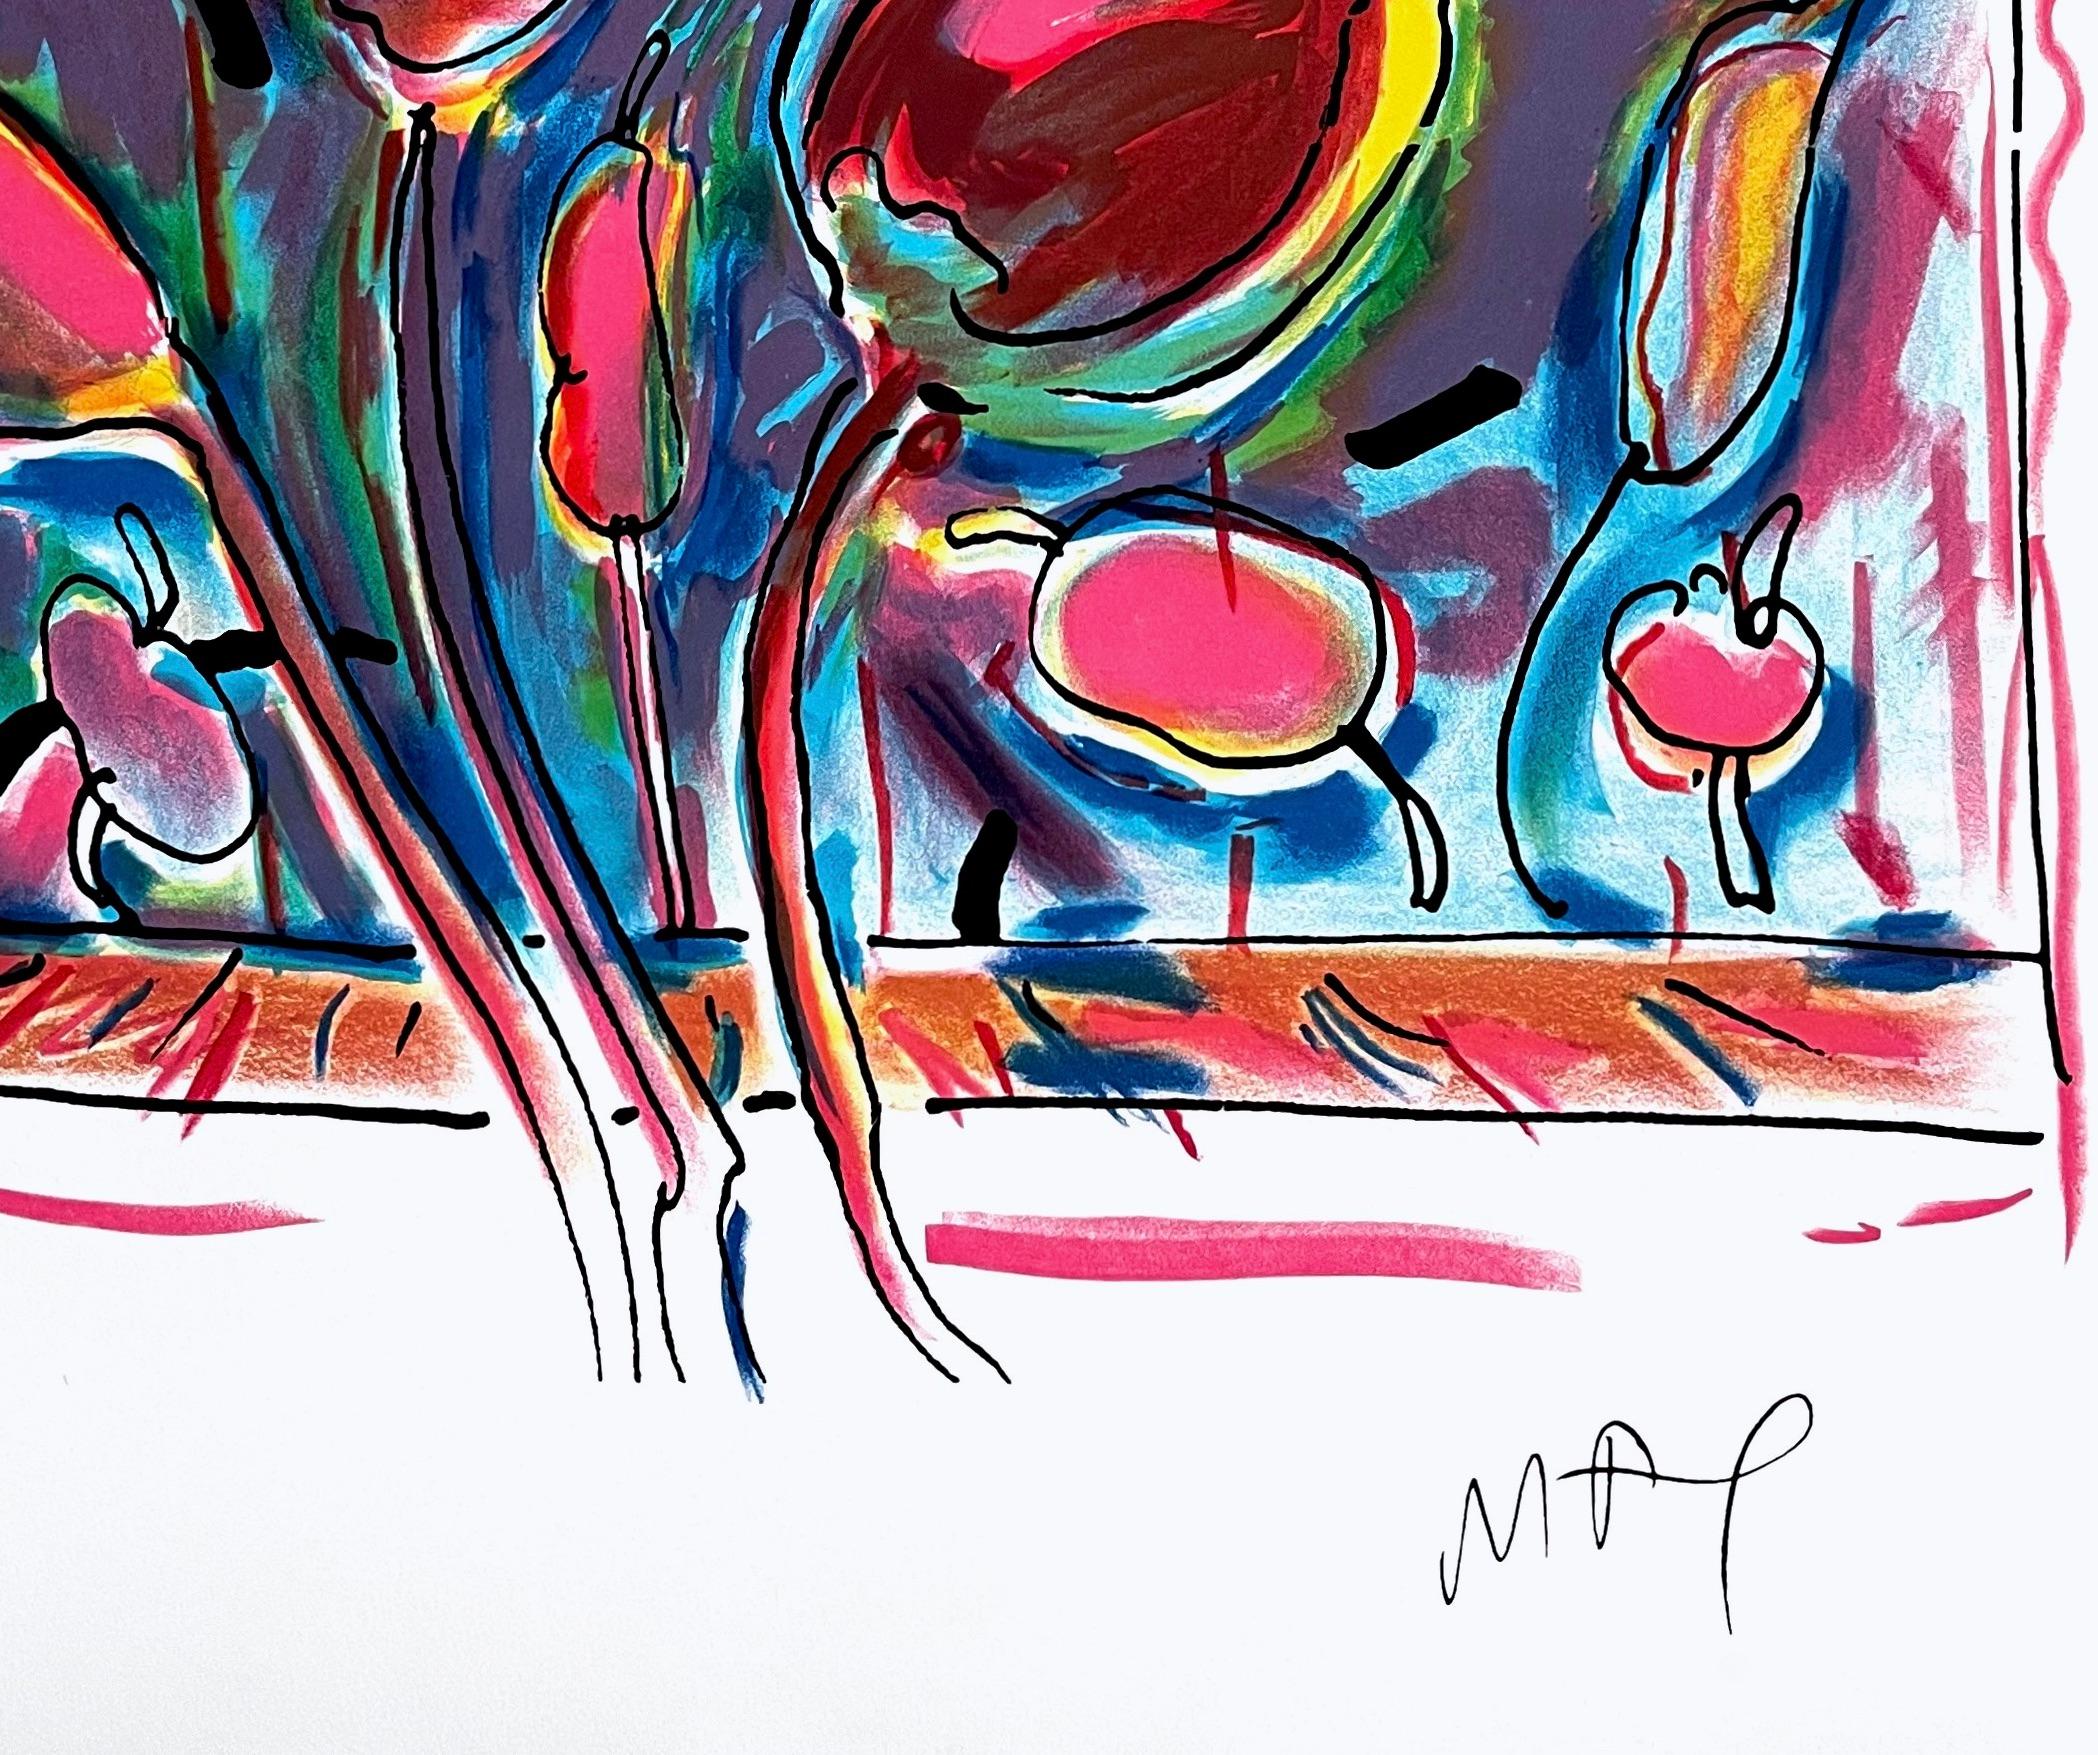 Artist: Peter Max (1937)
Title: Garden Flowers
Year: 1979
Edition: 350, plus proofs
Medium: Lithograph on Somerset paper
Size: 30 x 22 inches
Condition: Excellent
Inscription: Signed with the artist's plate-signed signature and numbered in